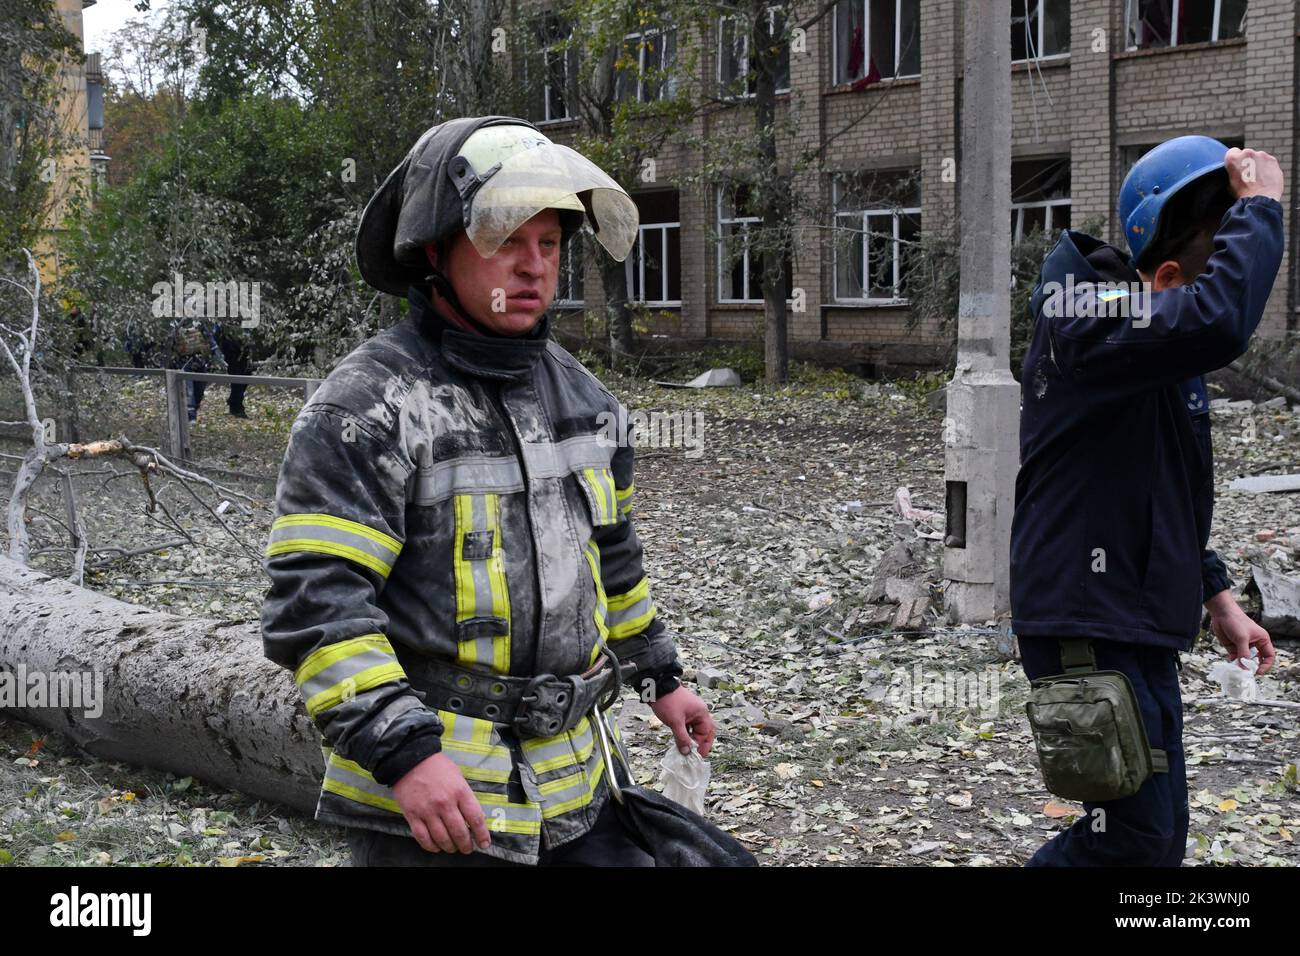 Rescuers are seen after they found a body of a school worker under the debris following a Russian attack that heavily damaged a high school in Mykolaivka. Dmitry Peskov, press secretary of the Russian President, has stated that Russia will continue the war even after sham referendums are conducted, and it will aim to occupy the entire territory of Donetsk Oblast. Stock Photo